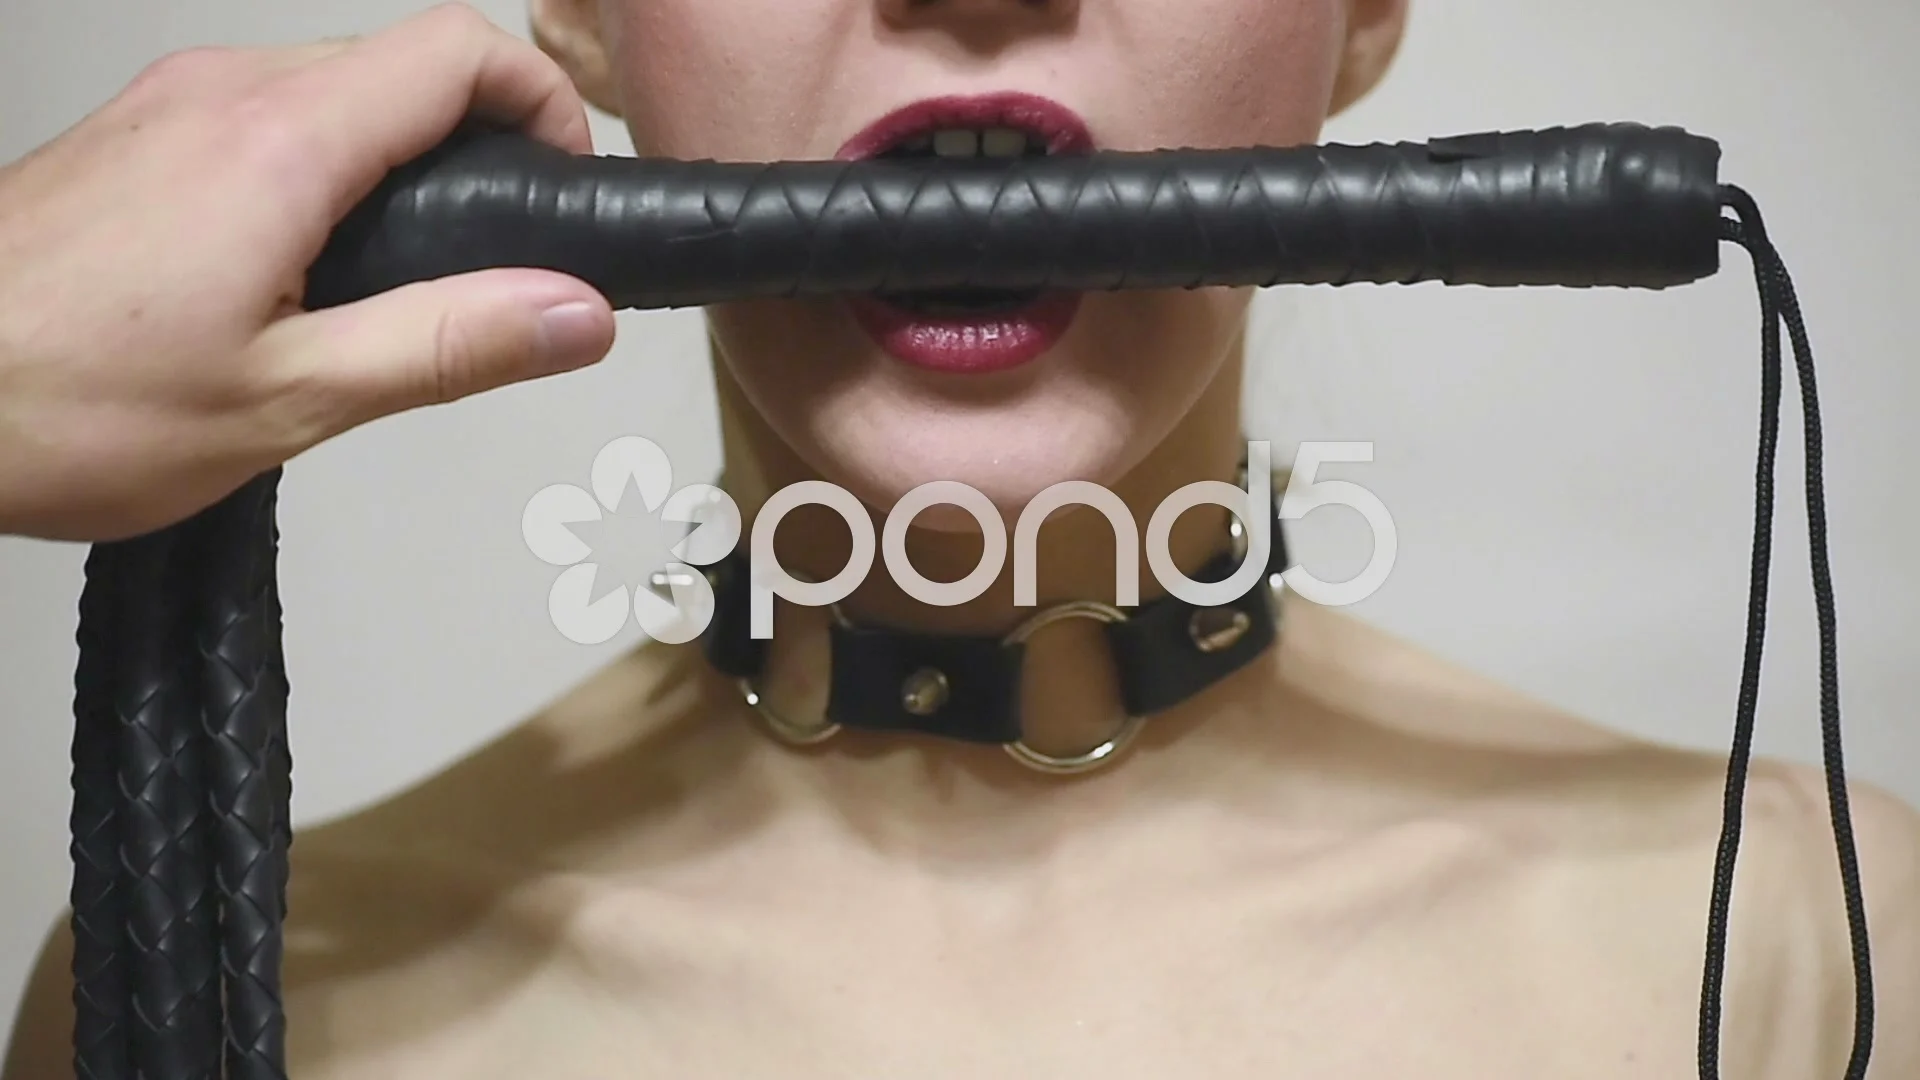 https://images.pond5.com/slave-attractive-woman-whip-mouth-057775717_prevstill.jpeg